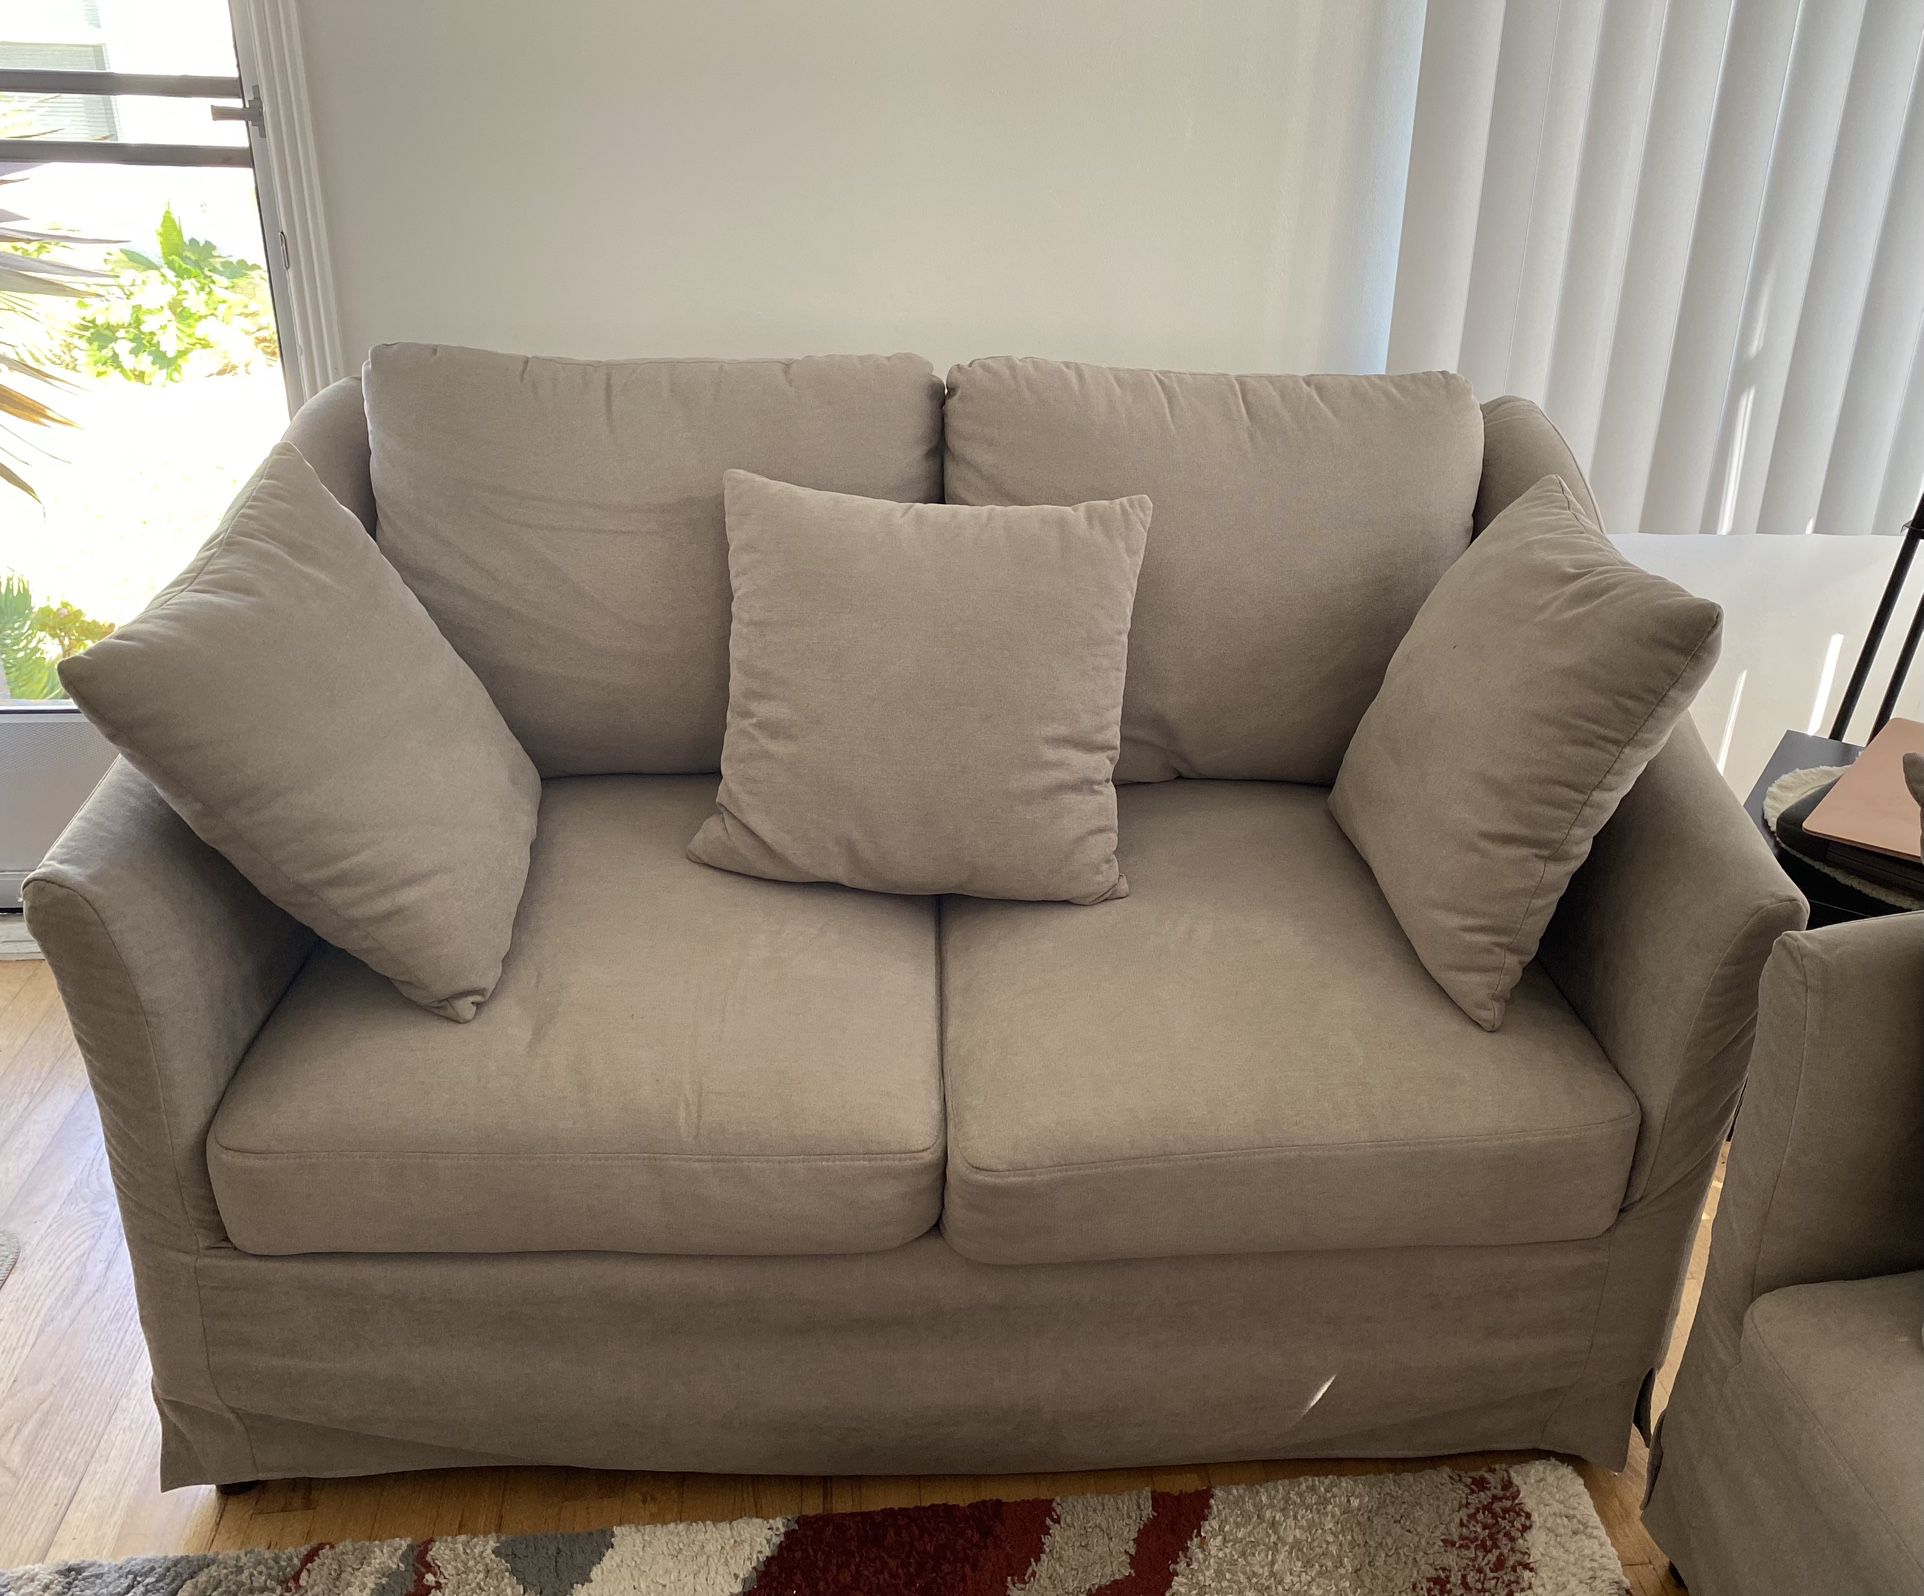 Sofa (2 seater) comes with free coffee tables and rug